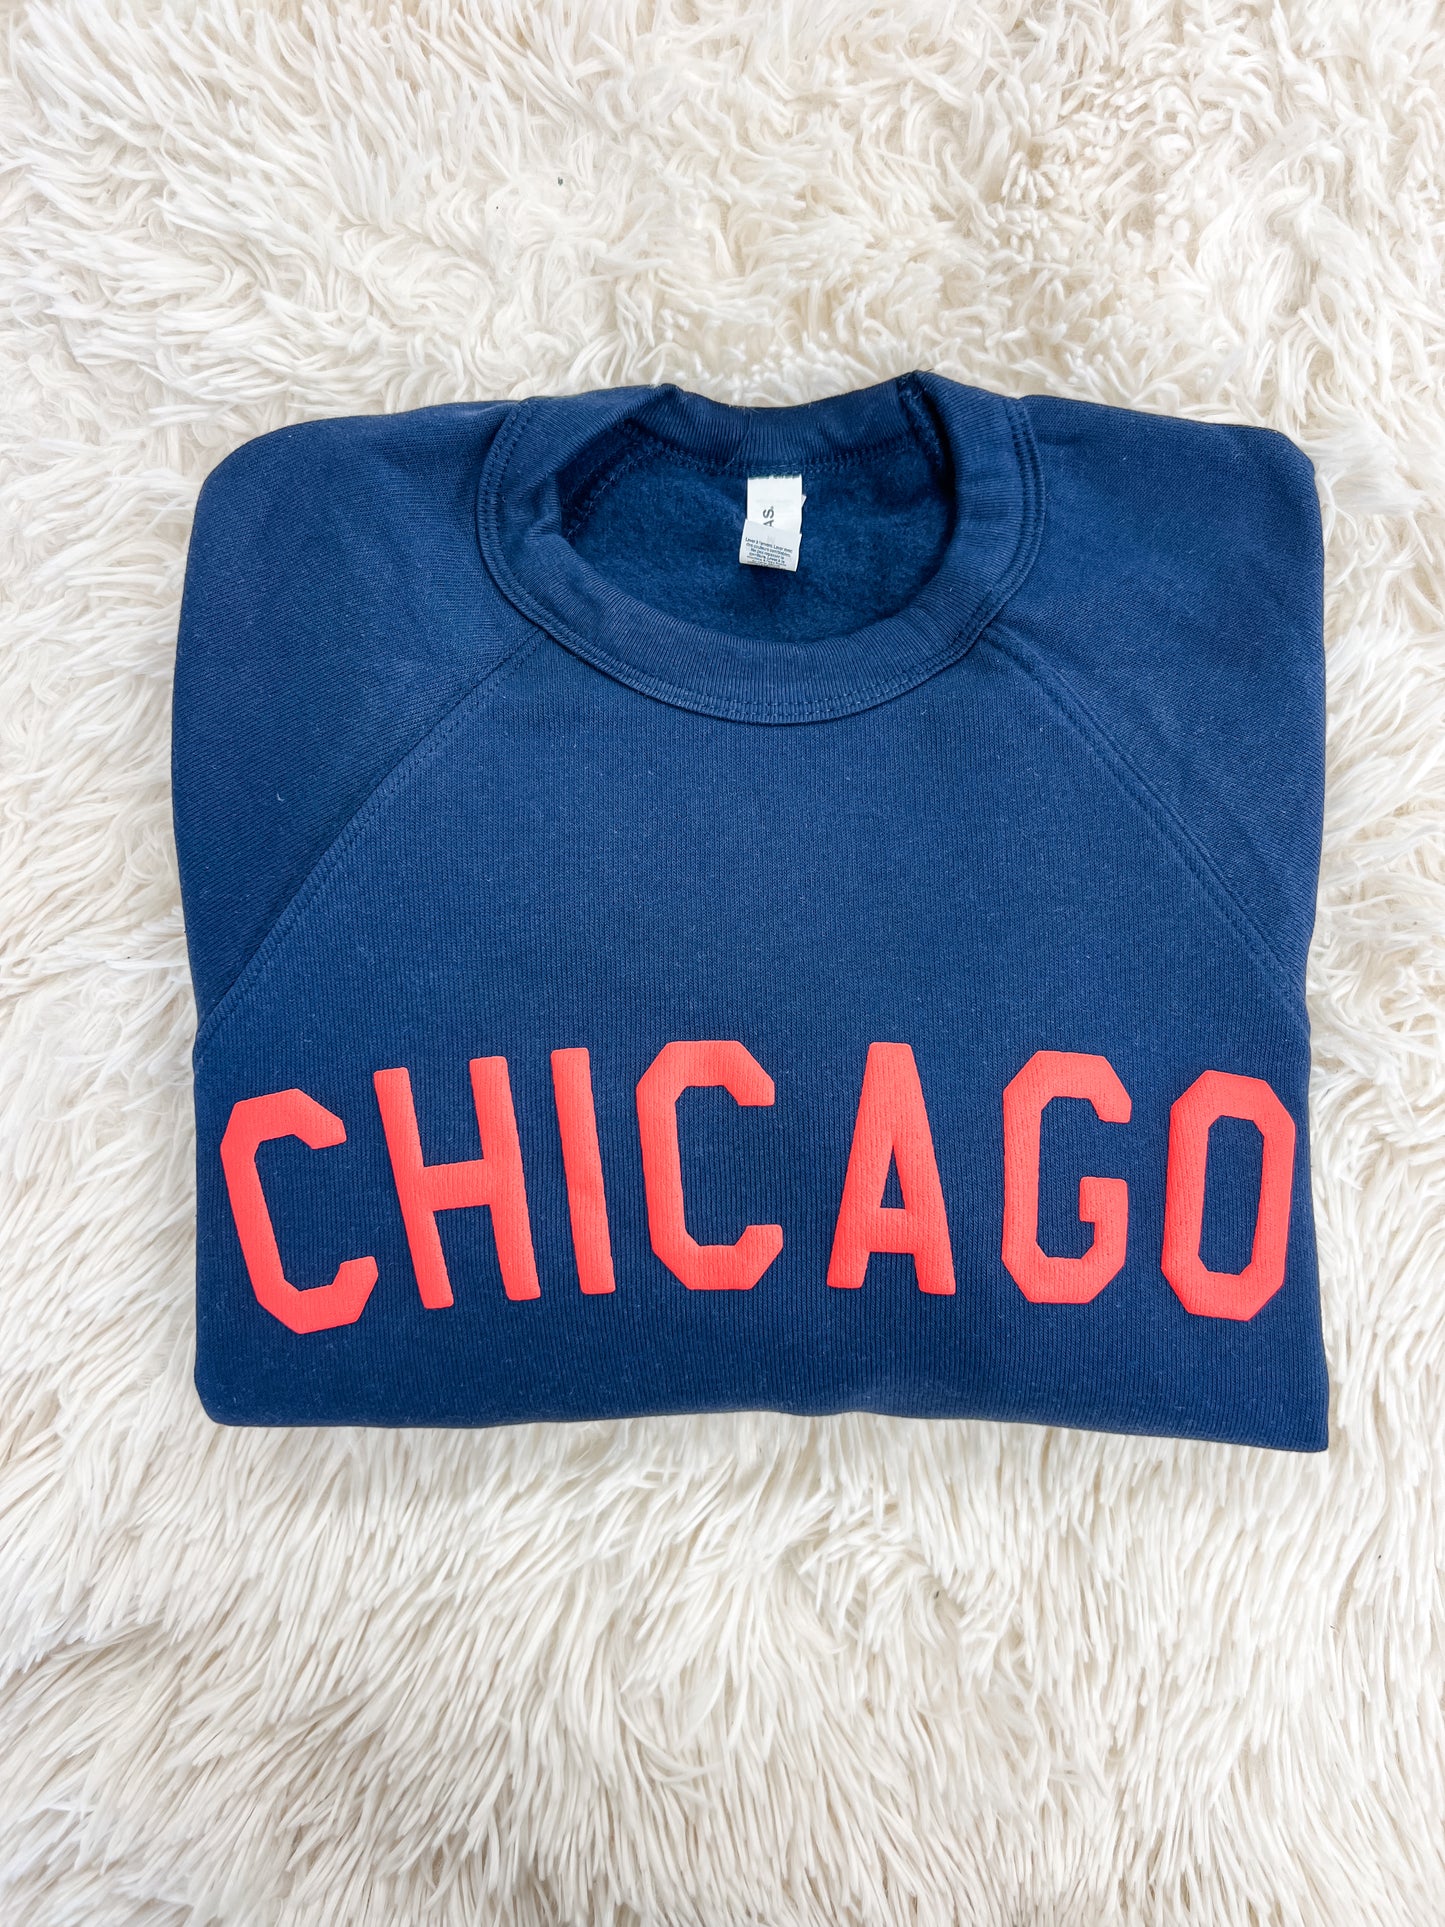 Navy and Red Chicago Crewneck